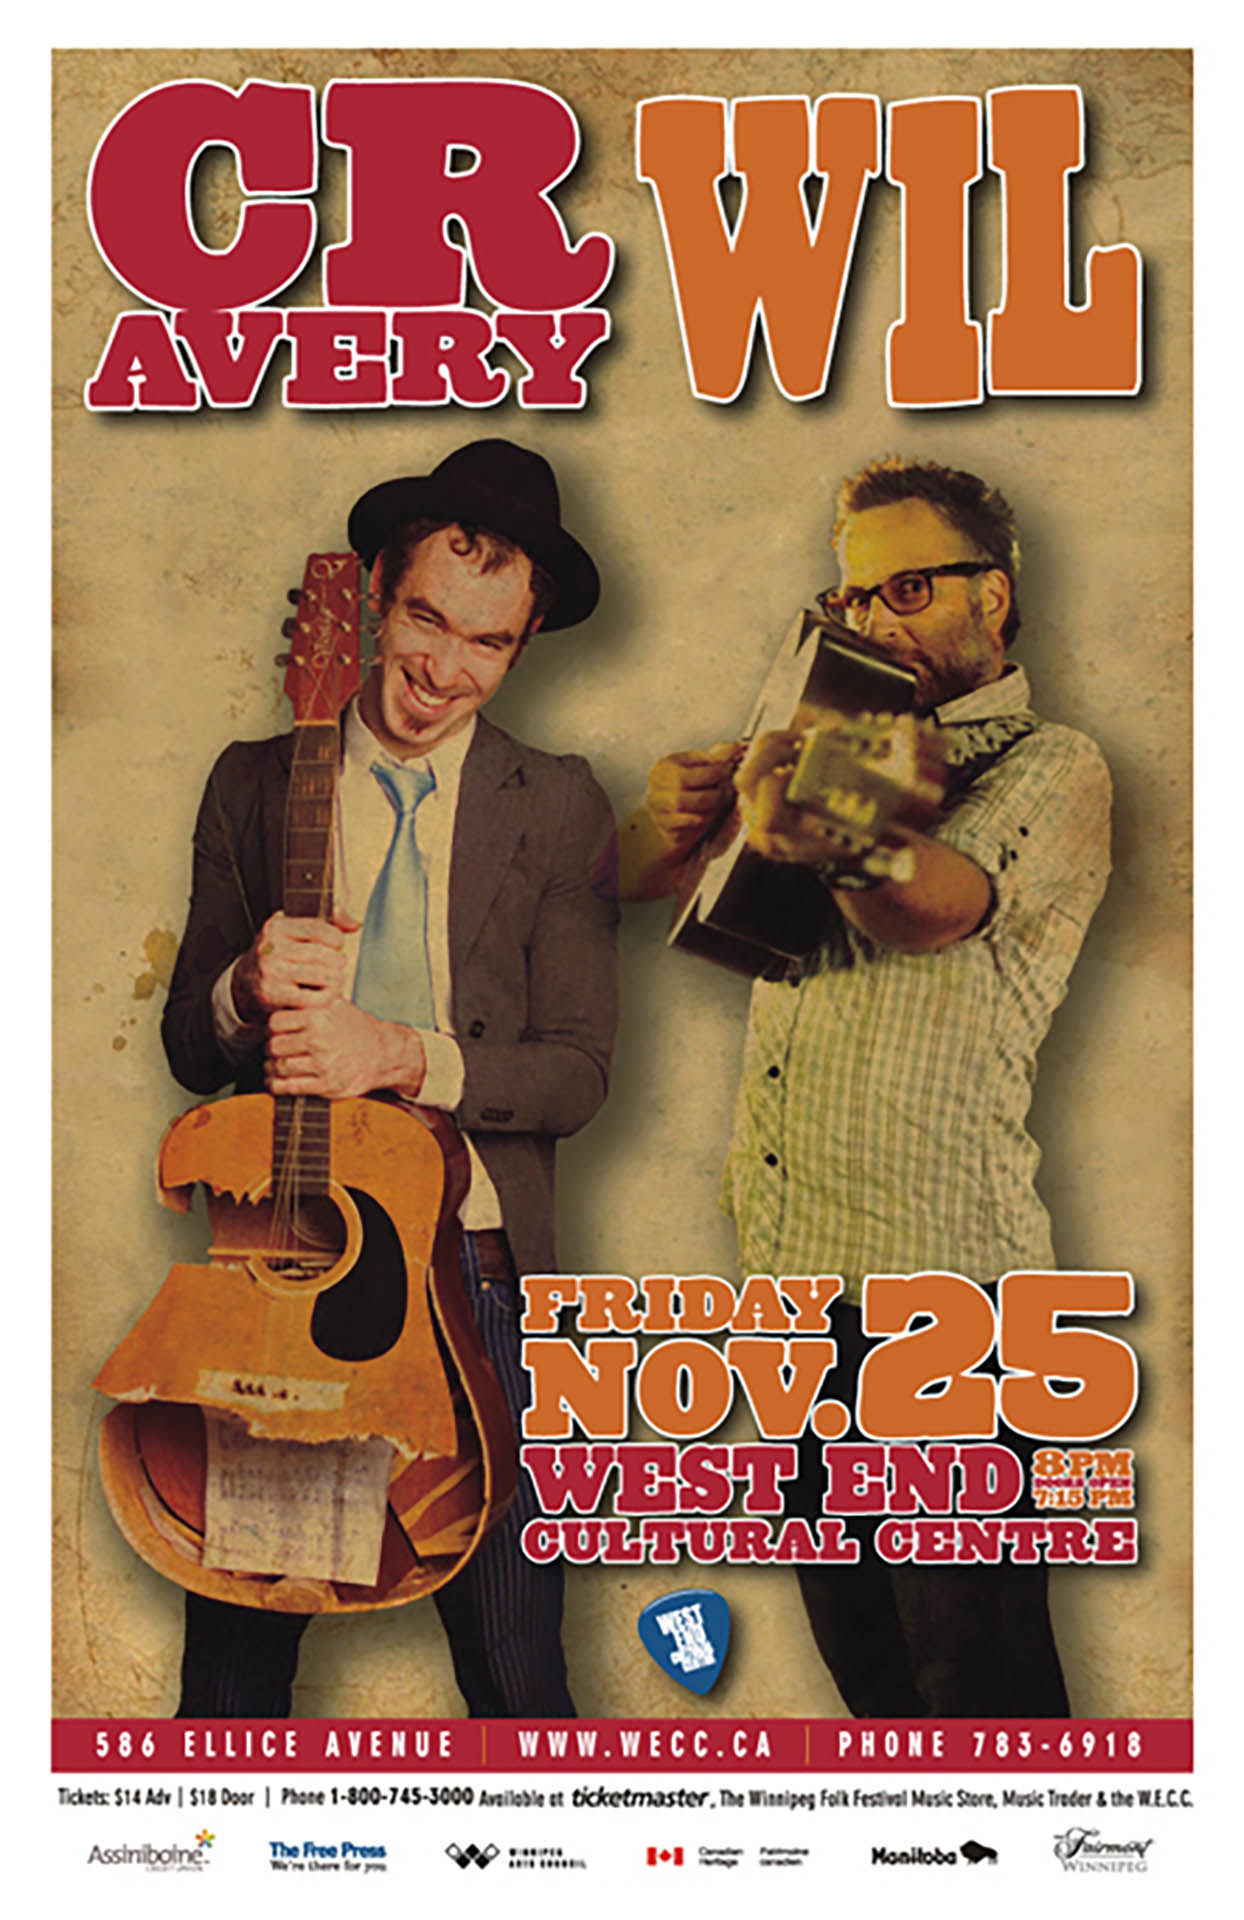 CR AVERY & WIL – 2011